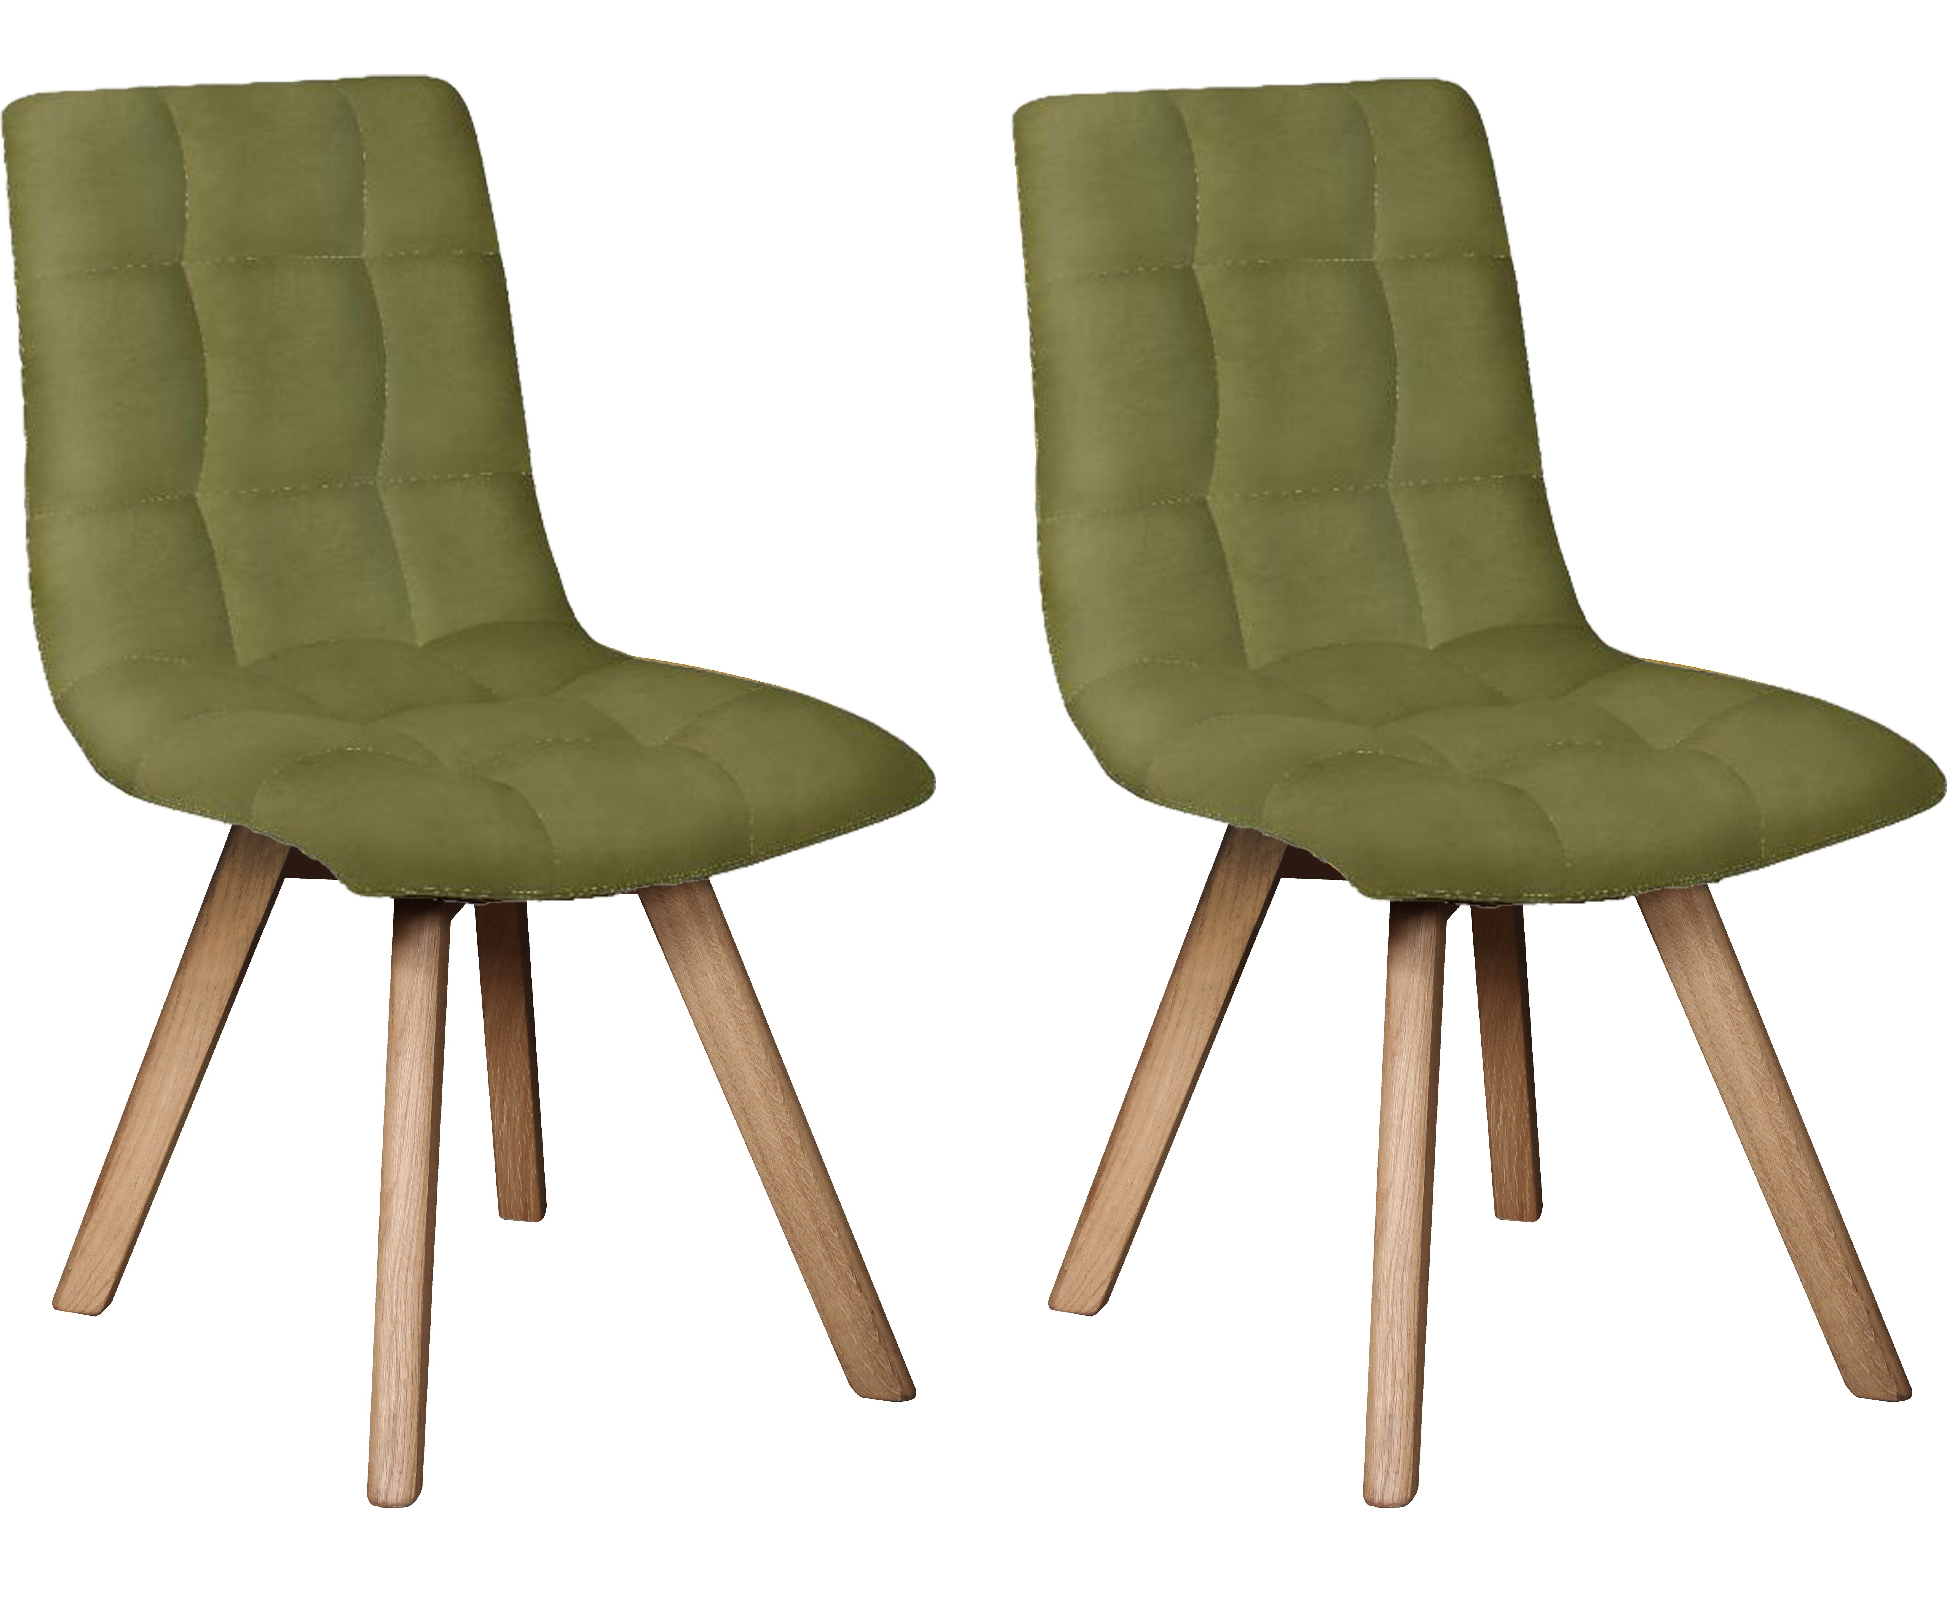 Pair of Carlton Furniture in Dolomite Dining Chairs in Olive